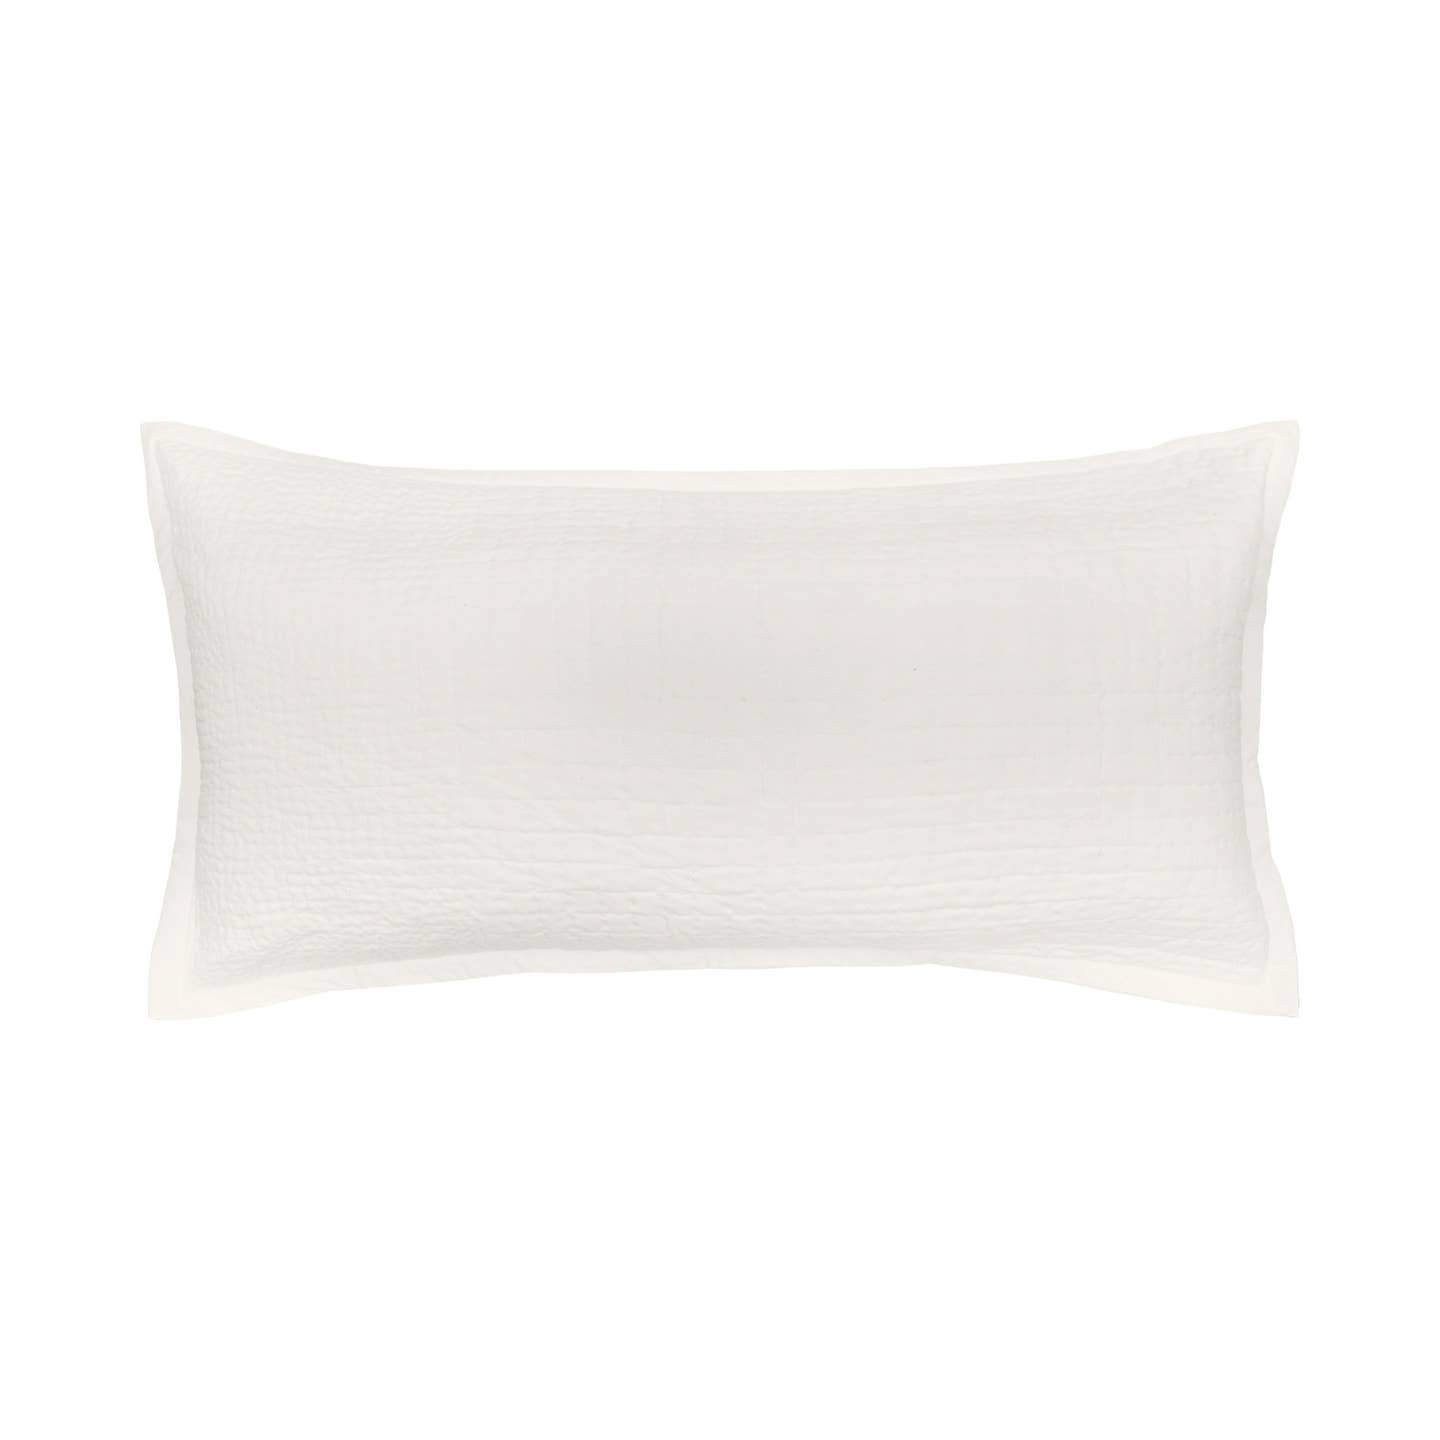 The Willa Ivory sham features two complementary quilting styles, both hand-stitched by skilled artisans for a uniquely luxurious experience. This lightweight 100% cotton voile collection is the perfect neutral backdrop upon which to build a personal retreat. Amethyst Home provides interior design services, furniture, rugs, and lighting in the Calibasas metro area.